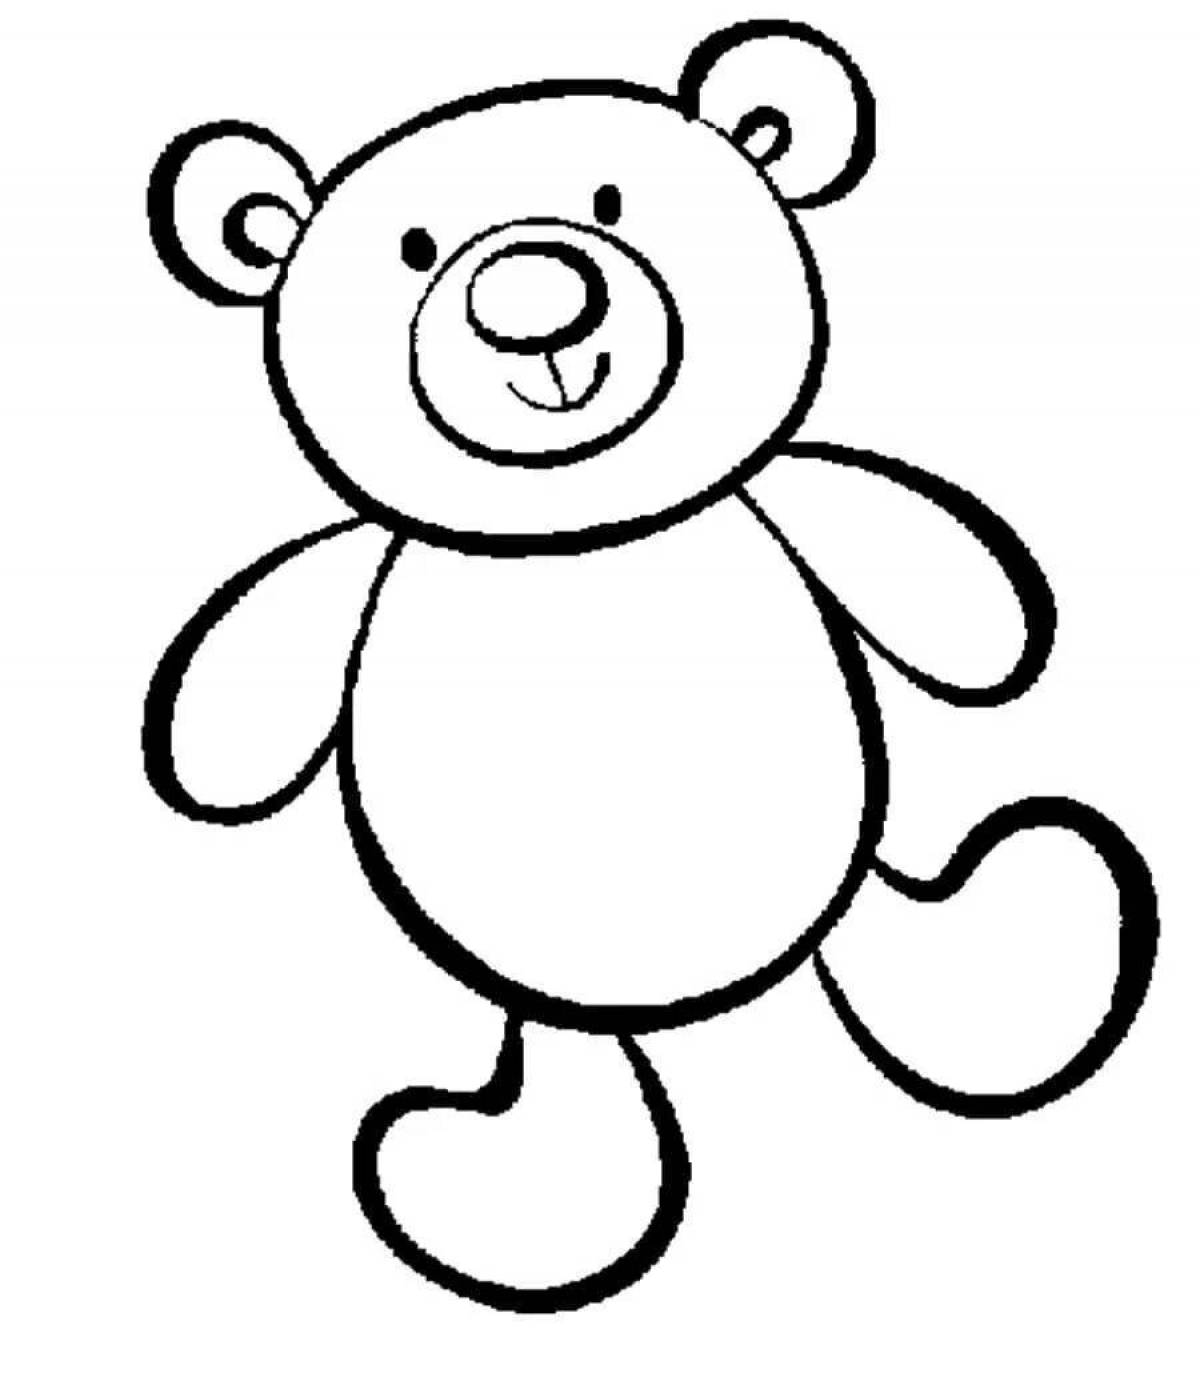 Clumsy bear coloring book